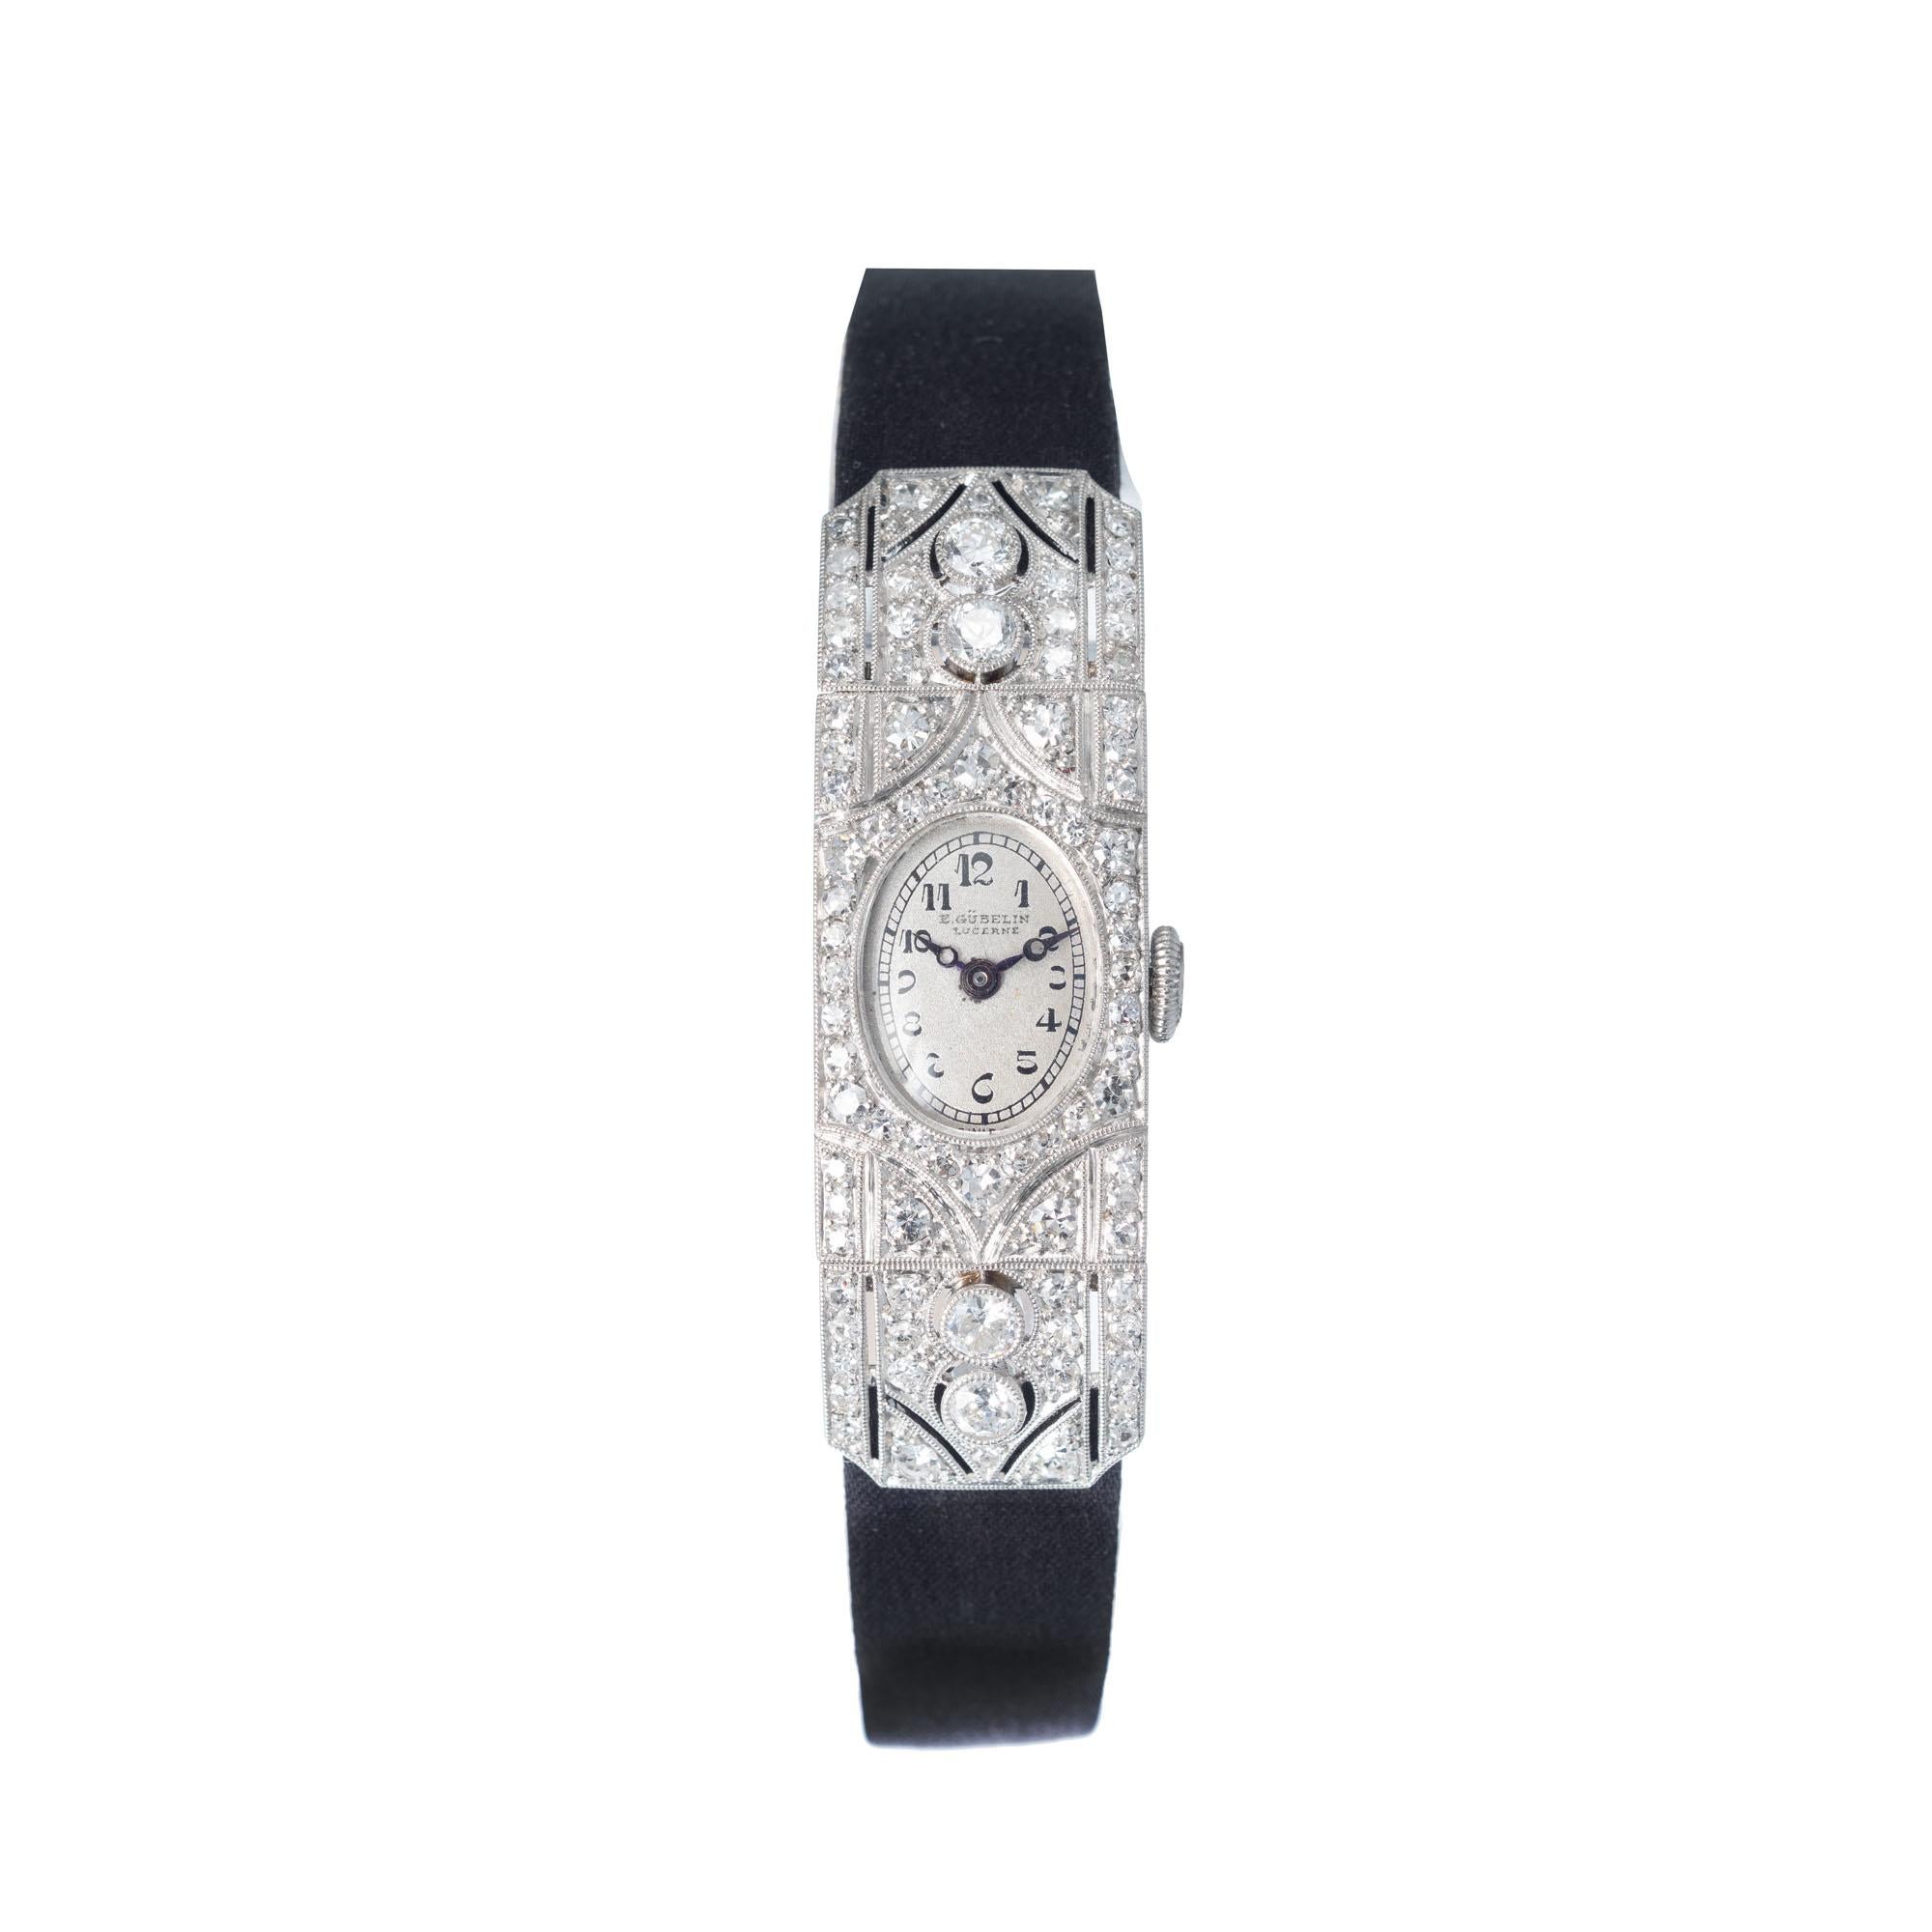 Ladies 1920's E. Gubelin Art Deco diamond ladies wristwatch. 17 jewel movement adjusted to 3 positions set with 86 old cut diamonds approximately 0.75 carats total. Pierced and engraved hinged case

Length: 42.85mm
Width: 13.64mm
Band width at case: